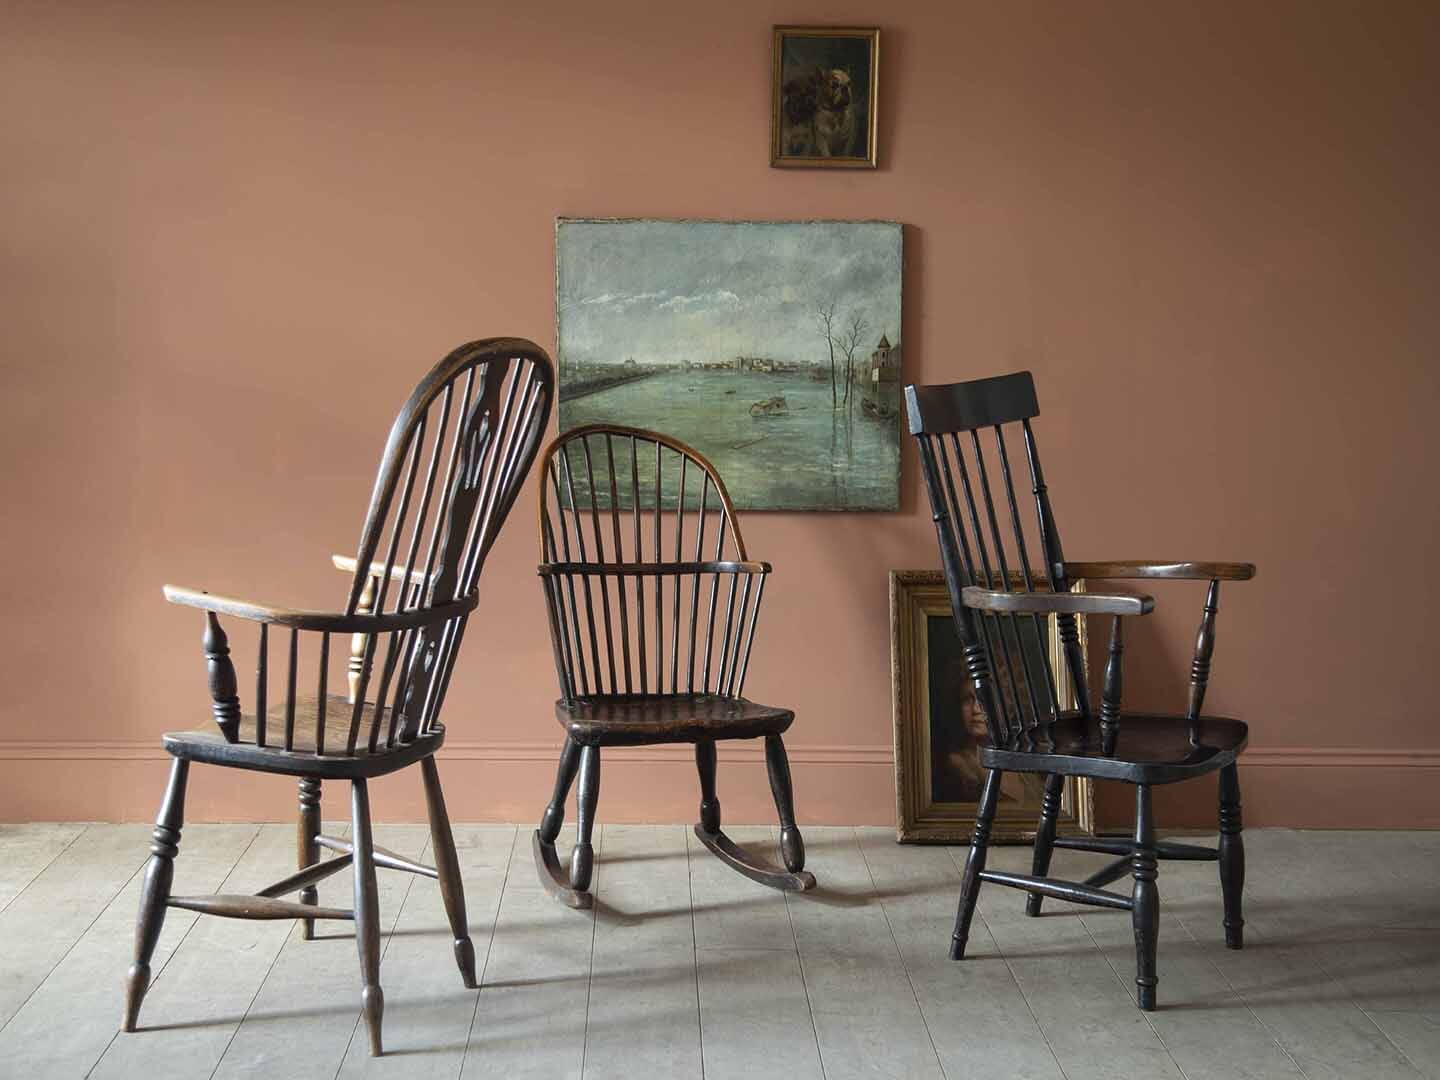 All about the Windsor chair